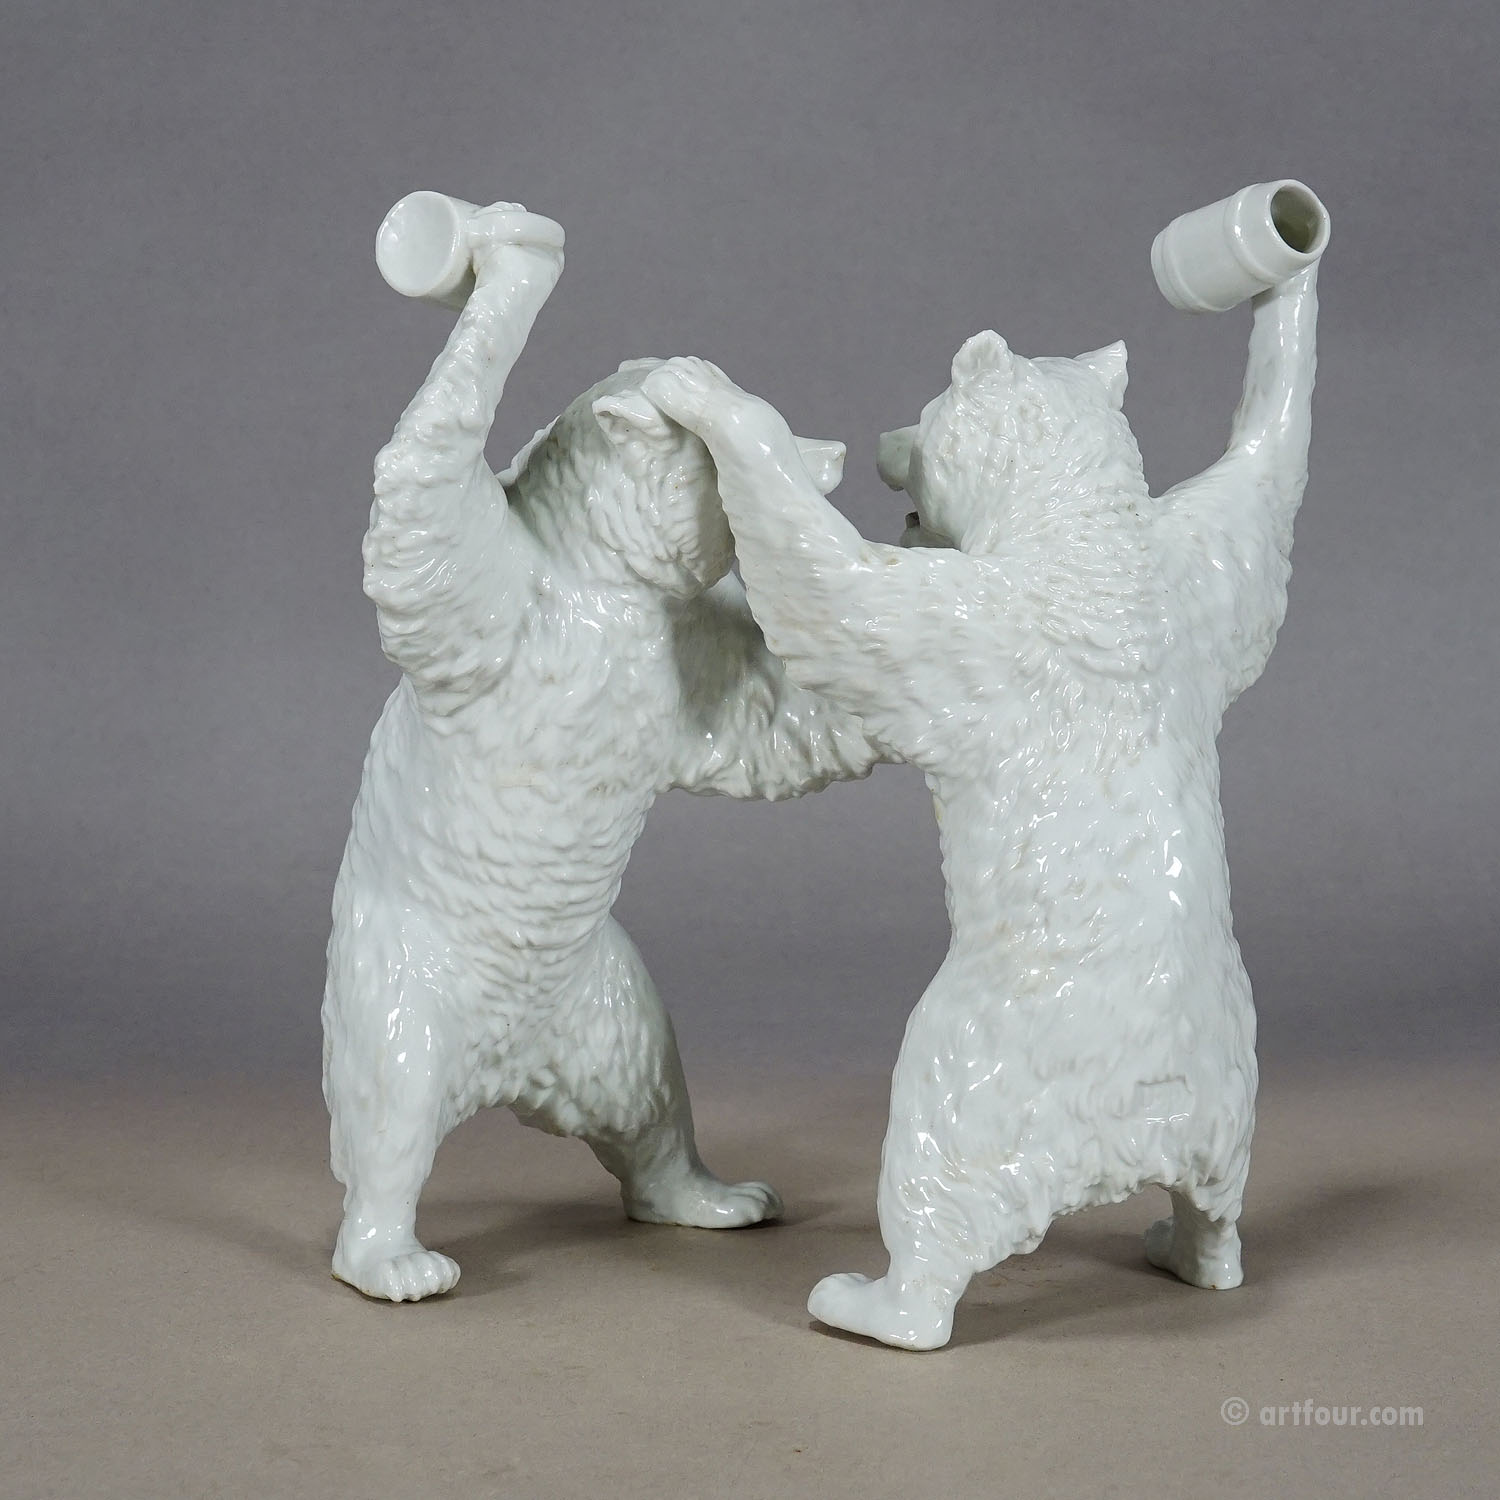 Antique Fighting Bears Porcelaine Sculpture, Germany ca. 1920s